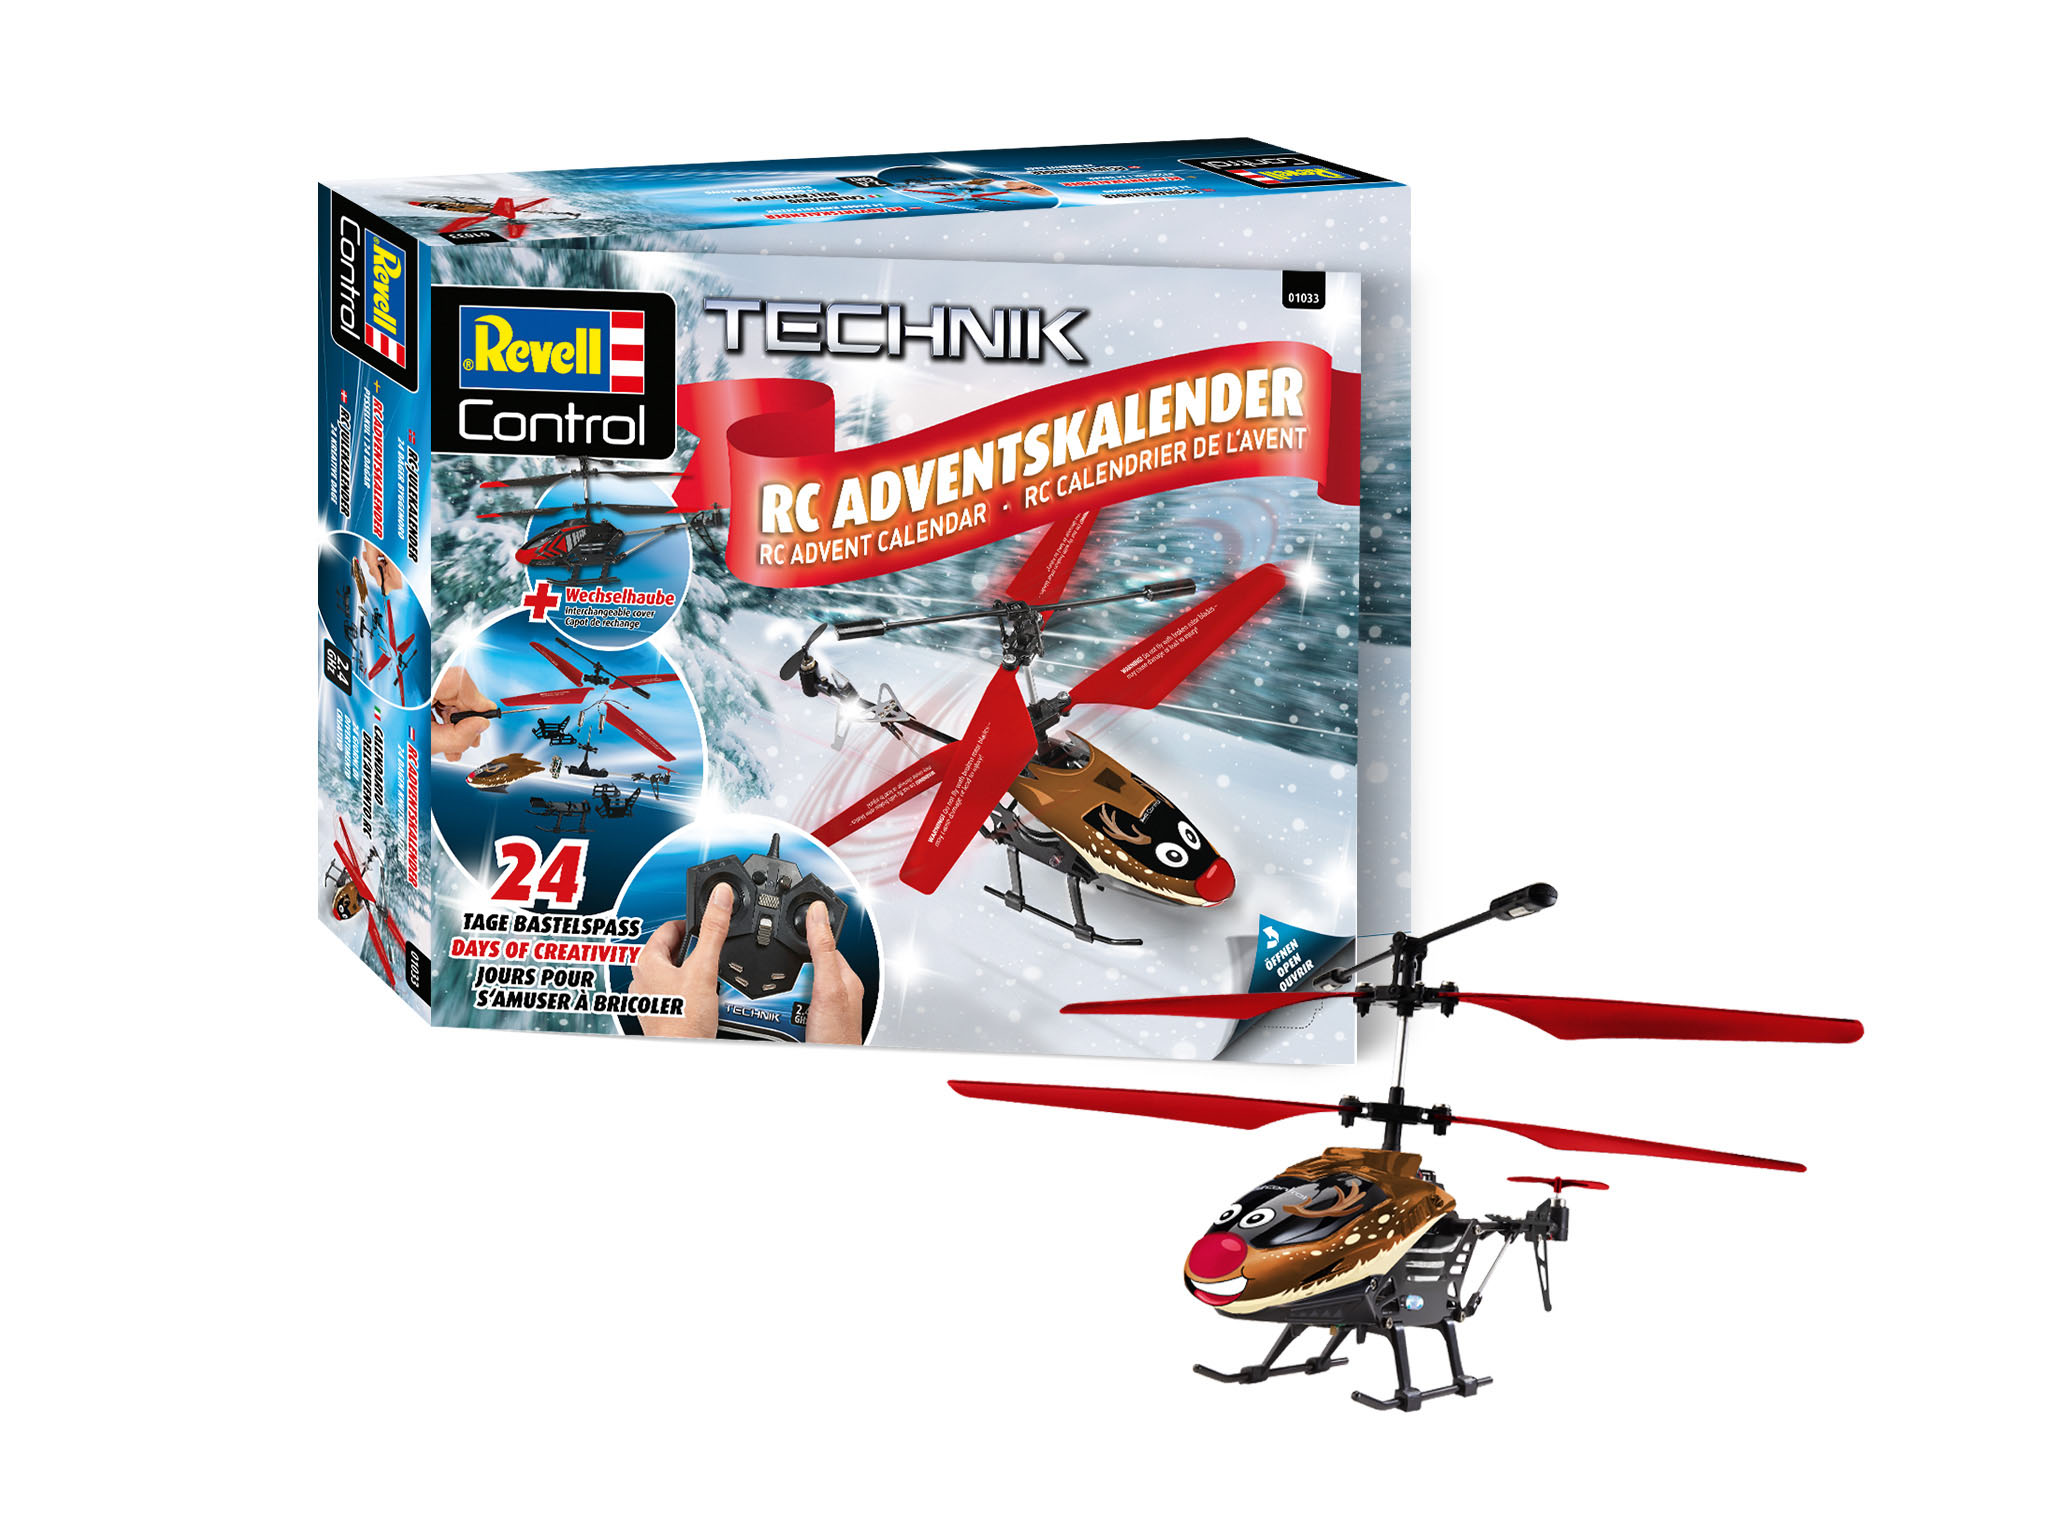 Revell Model Building Official Website Of Revell Germany Advent Calendar Rc Helicopter